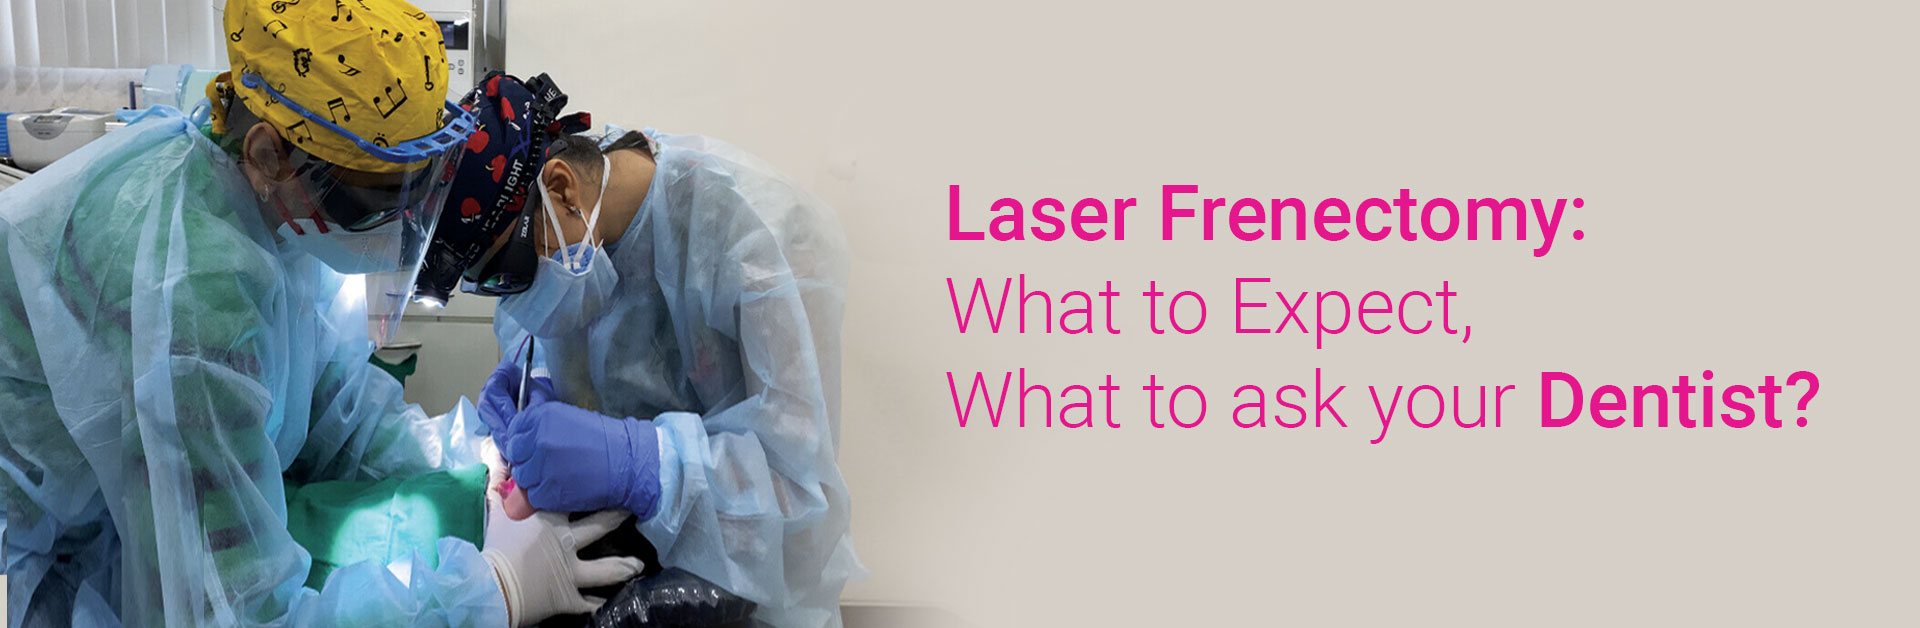 LASER FRENECTOMY: WHAT TO EXPECT, WHAT TO ASK YOUR DENTIST?